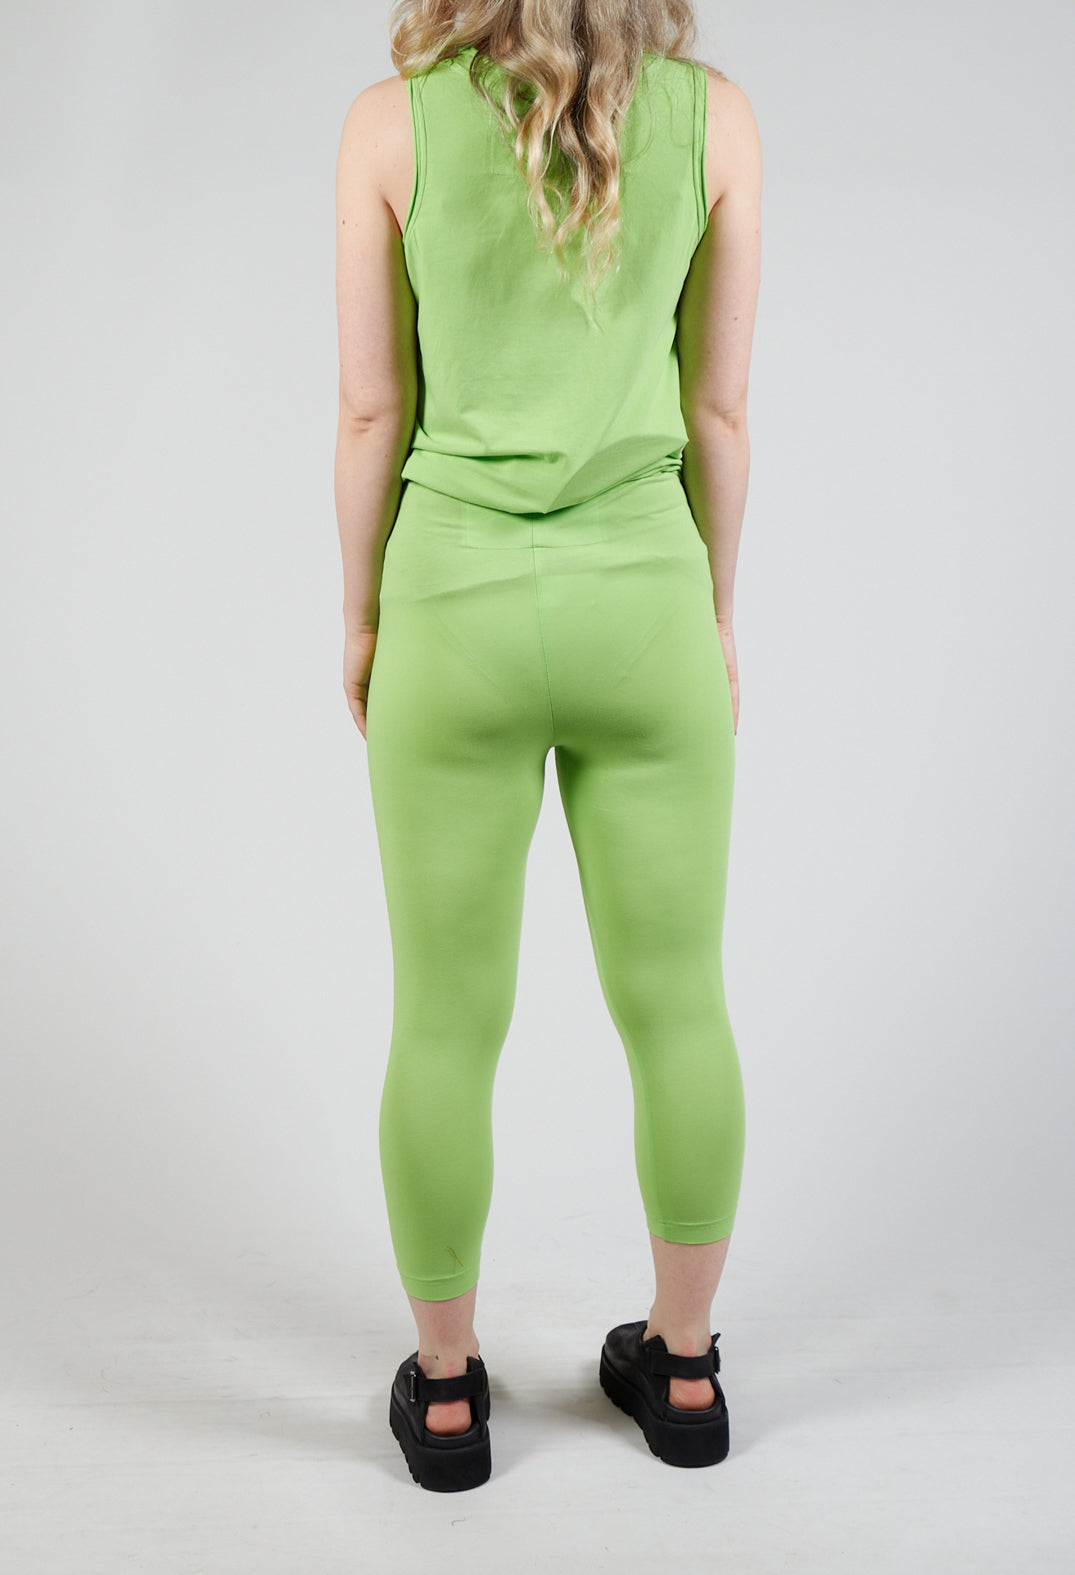 Cropped Jersey Leggings in Lime